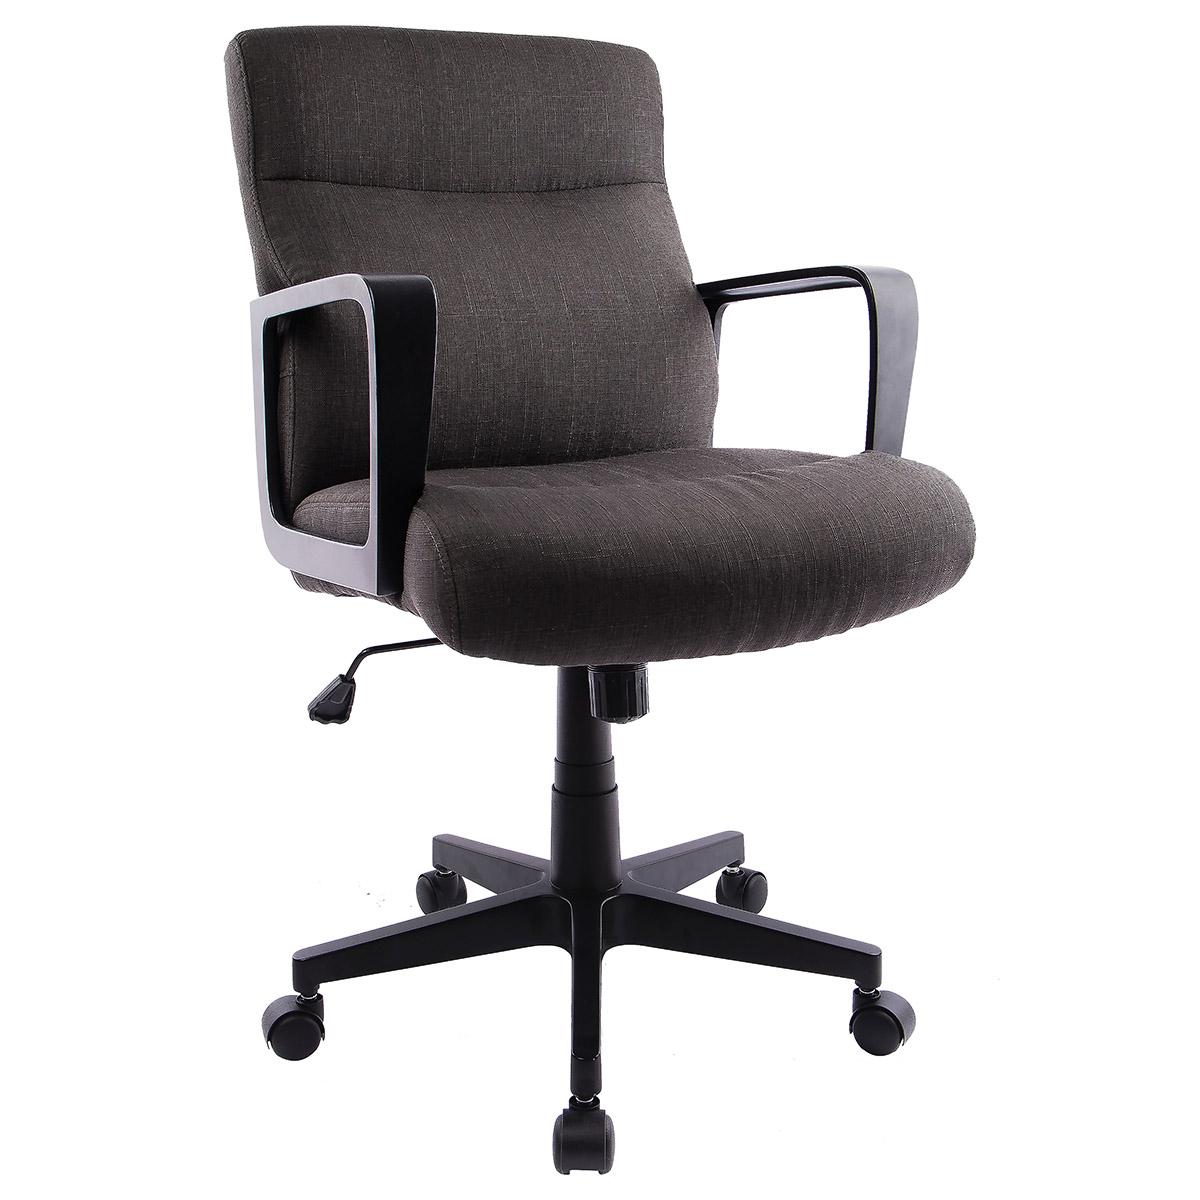 Brookmere Fabric Manager Chair for $69.99 Shipped